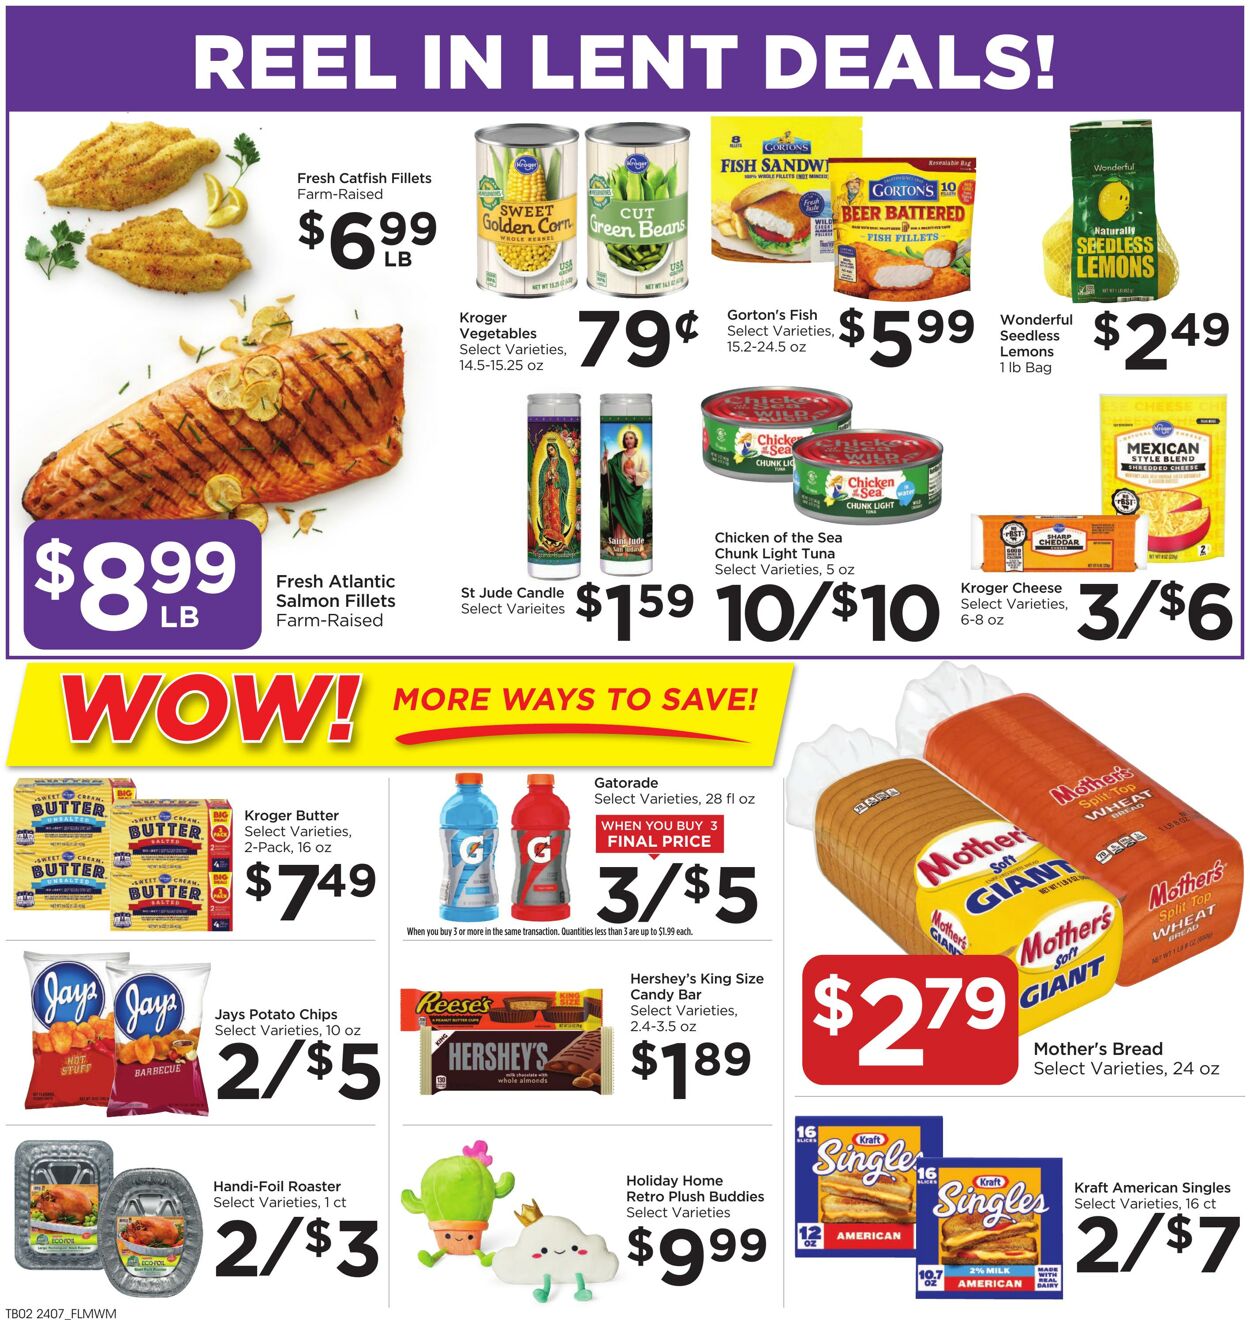 Catalogue Food 4 Less from 03/20/2024